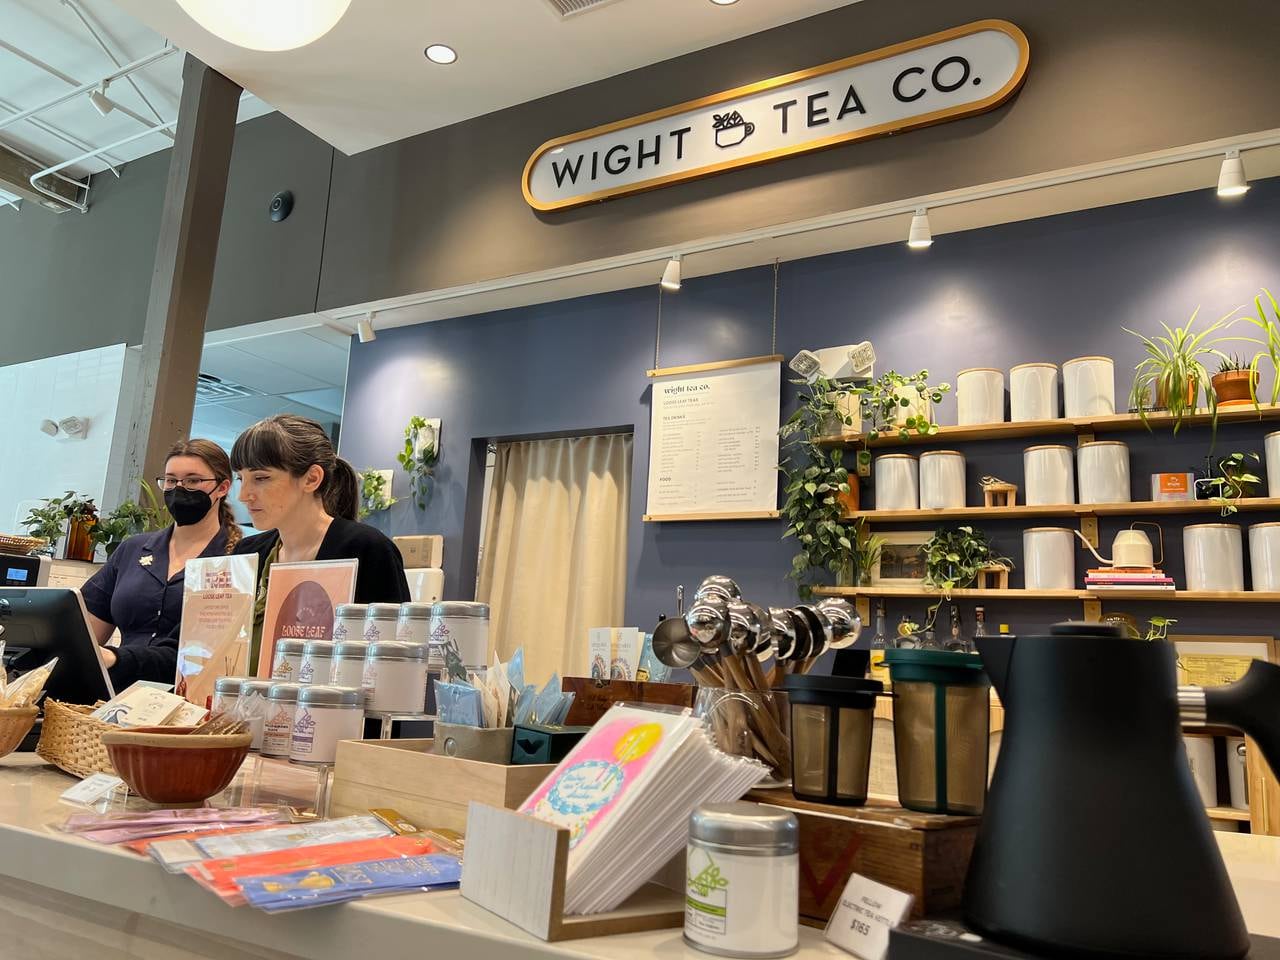 Brittany Wight and cashier Ariel complete an order at Wight Tea Co. in Whitehall Market on March 7, 2023.